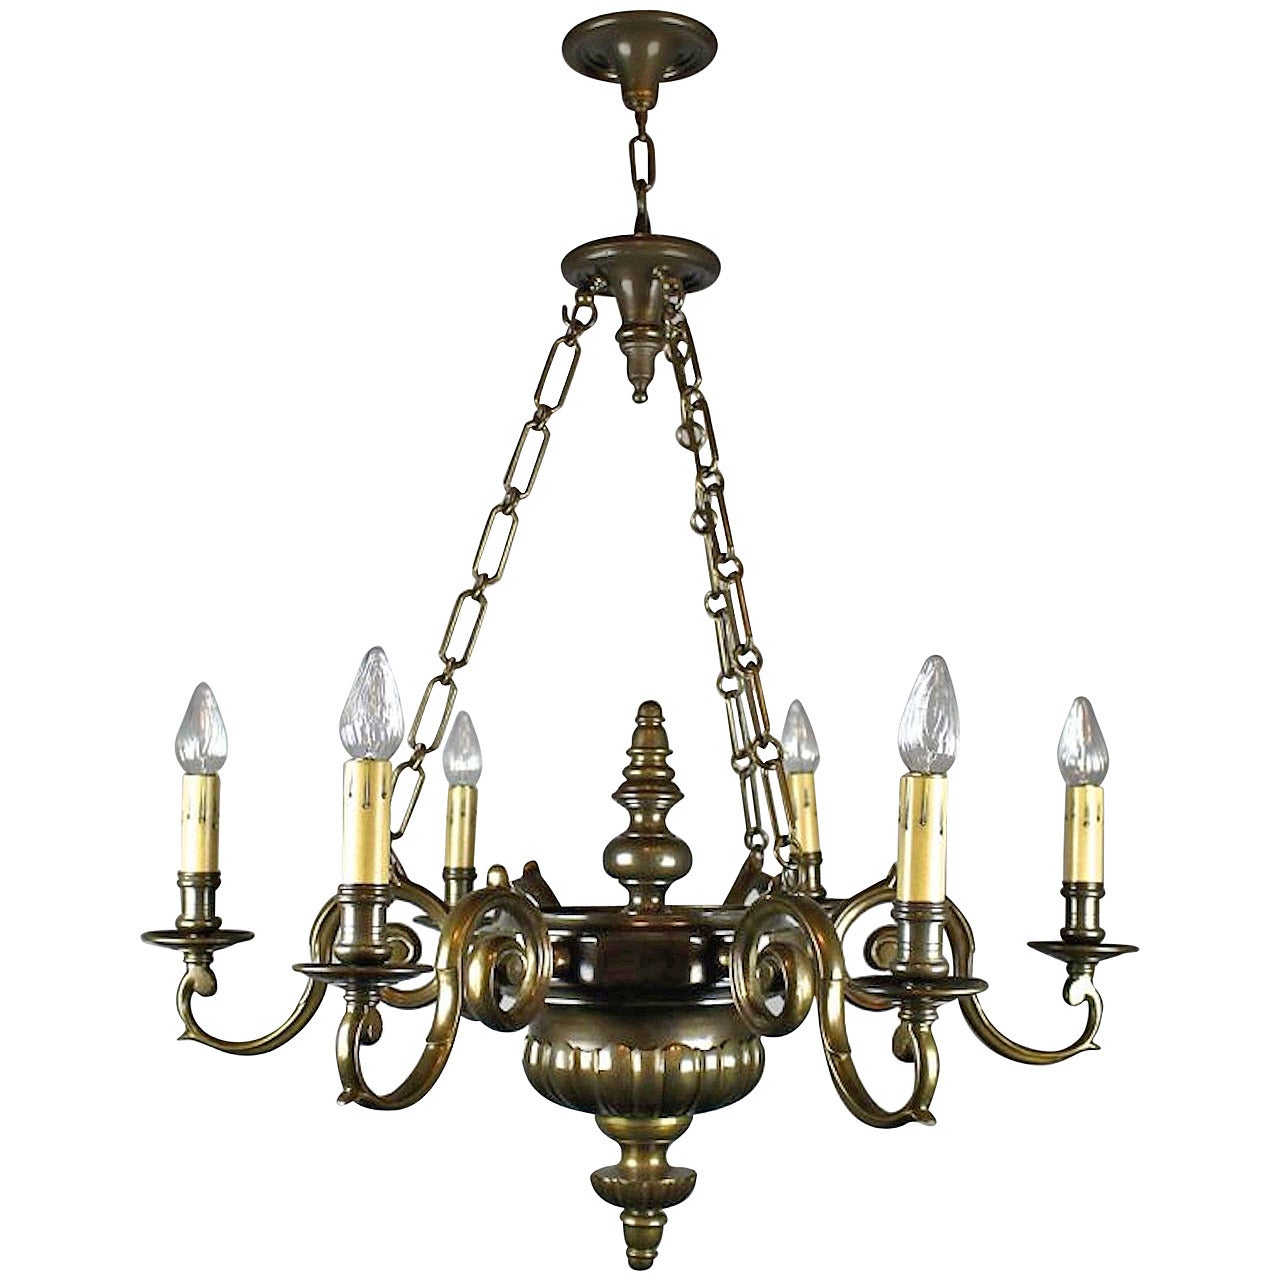 Large Sheffield Style Lighting Fixture with Candle Arms (6-light) For Sale